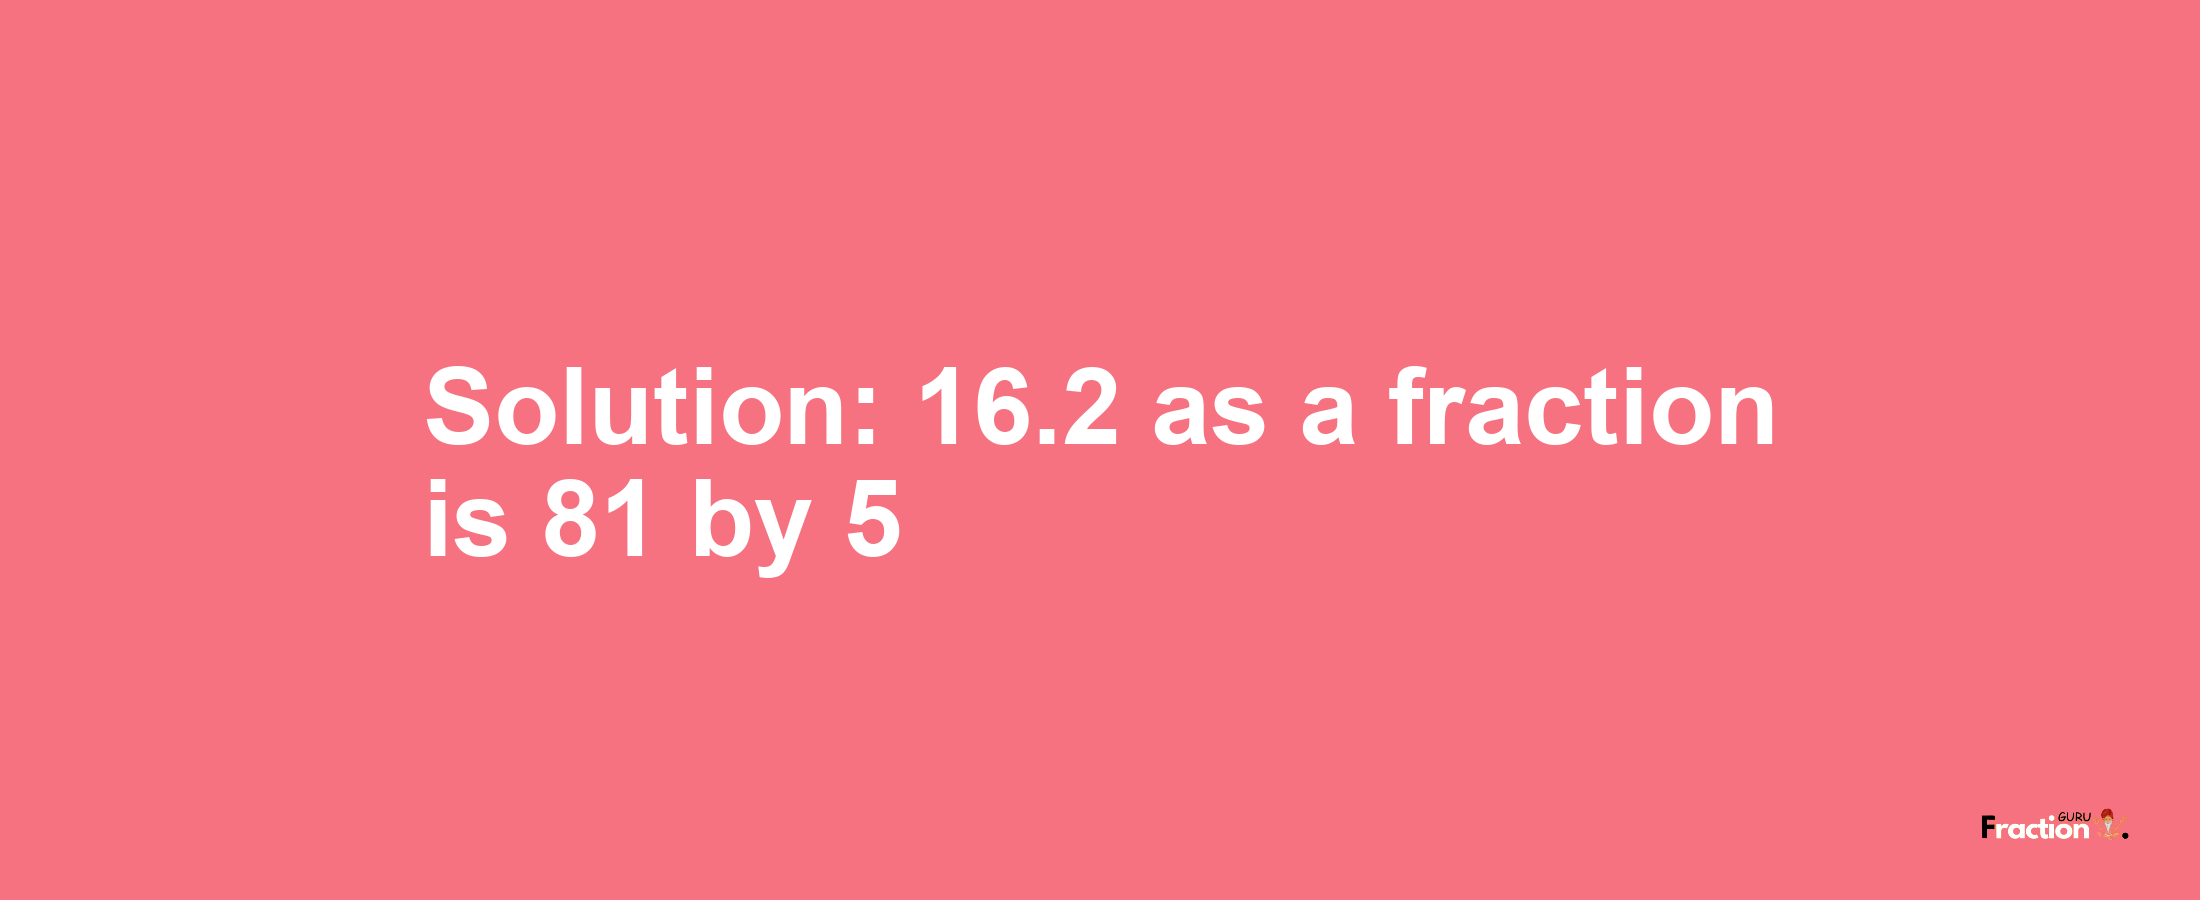 Solution:16.2 as a fraction is 81/5